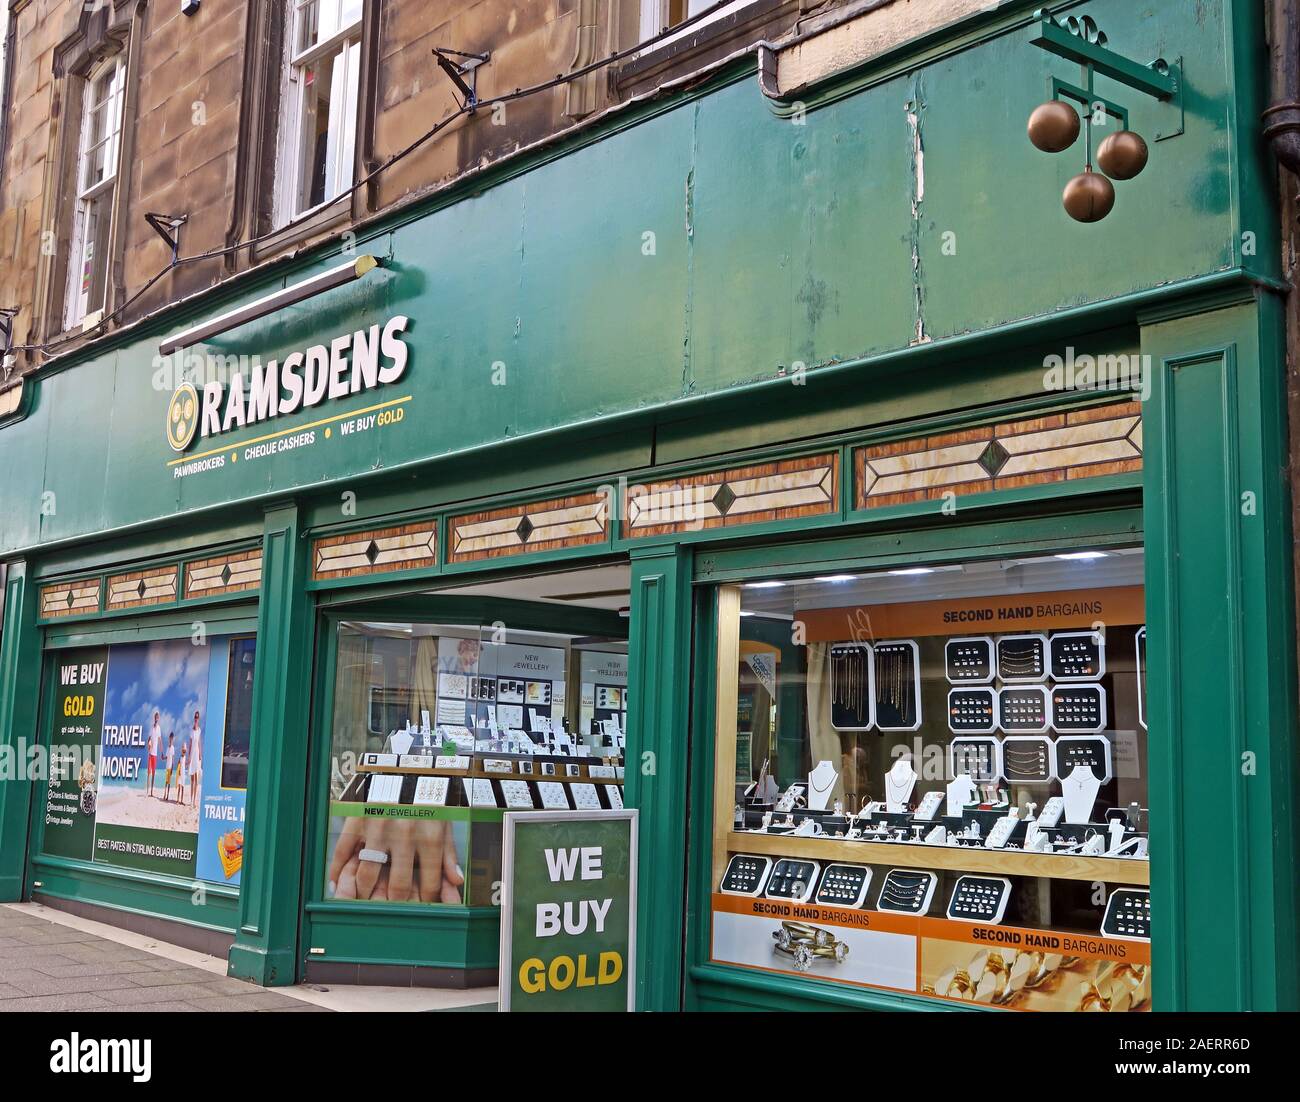 Ramsdens Pawnbroker, cheque Cashers, We Buy Gold, 9-11 Murray Place, Stirling,Scotland,UK, FK8 1DQ Foto Stock